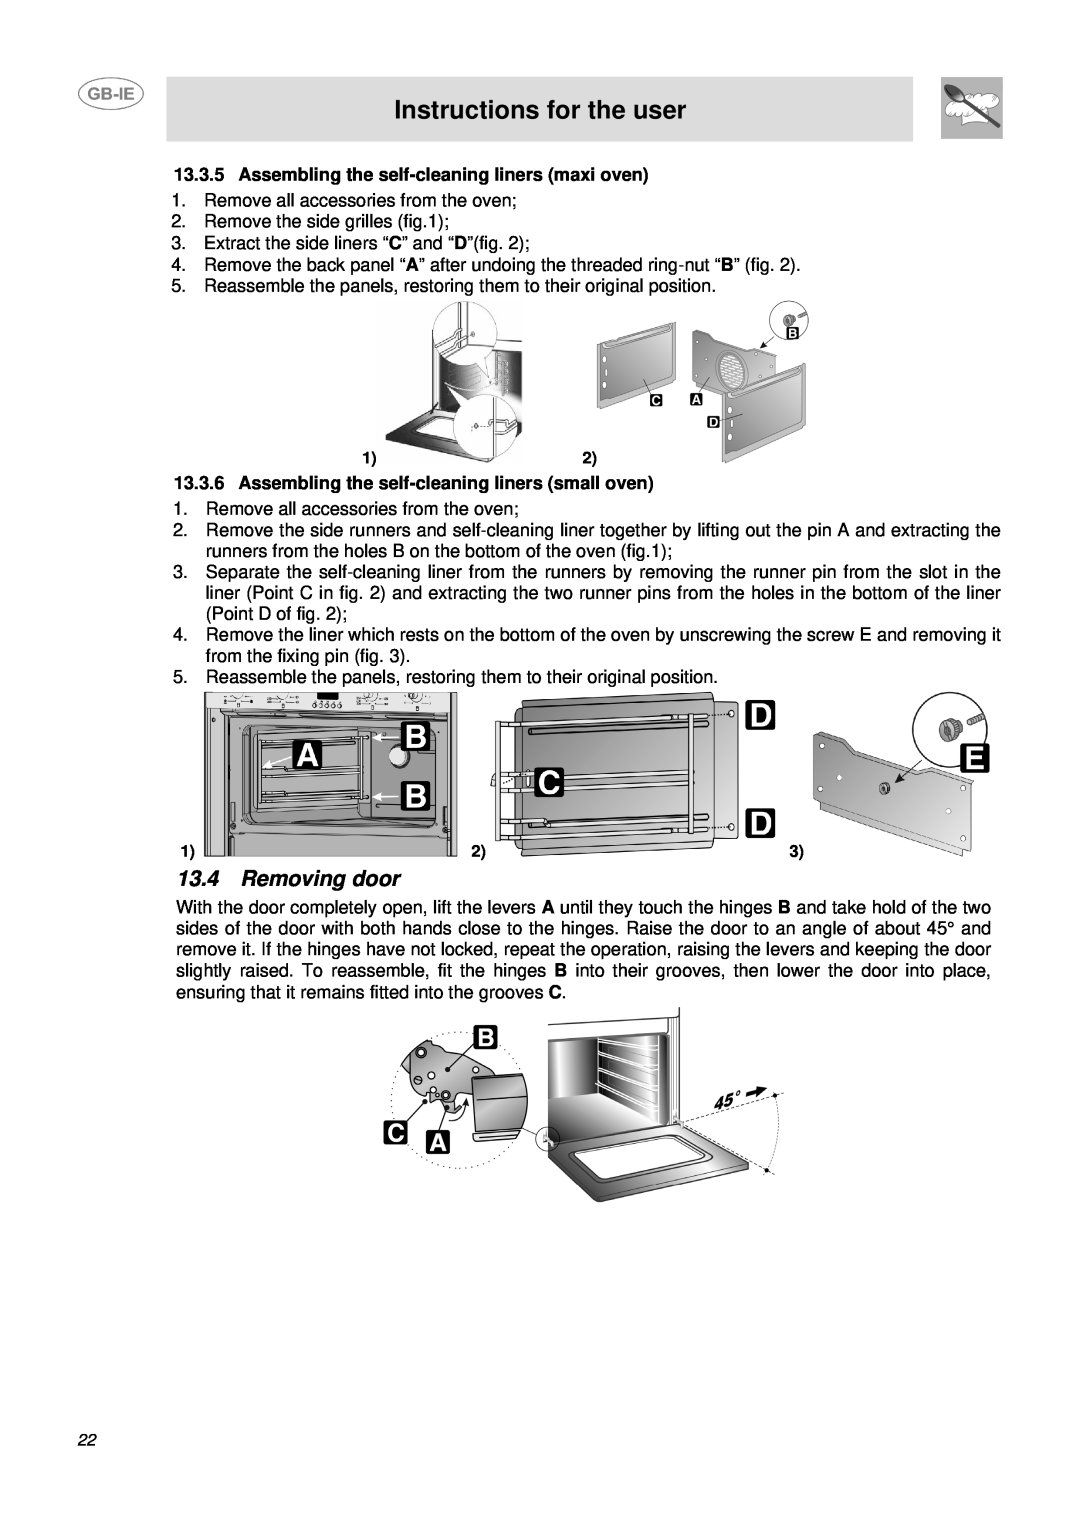 Smeg DUCO4SS manual Removing door, Instructions for the user, Assembling the self-cleaning liners maxi oven 